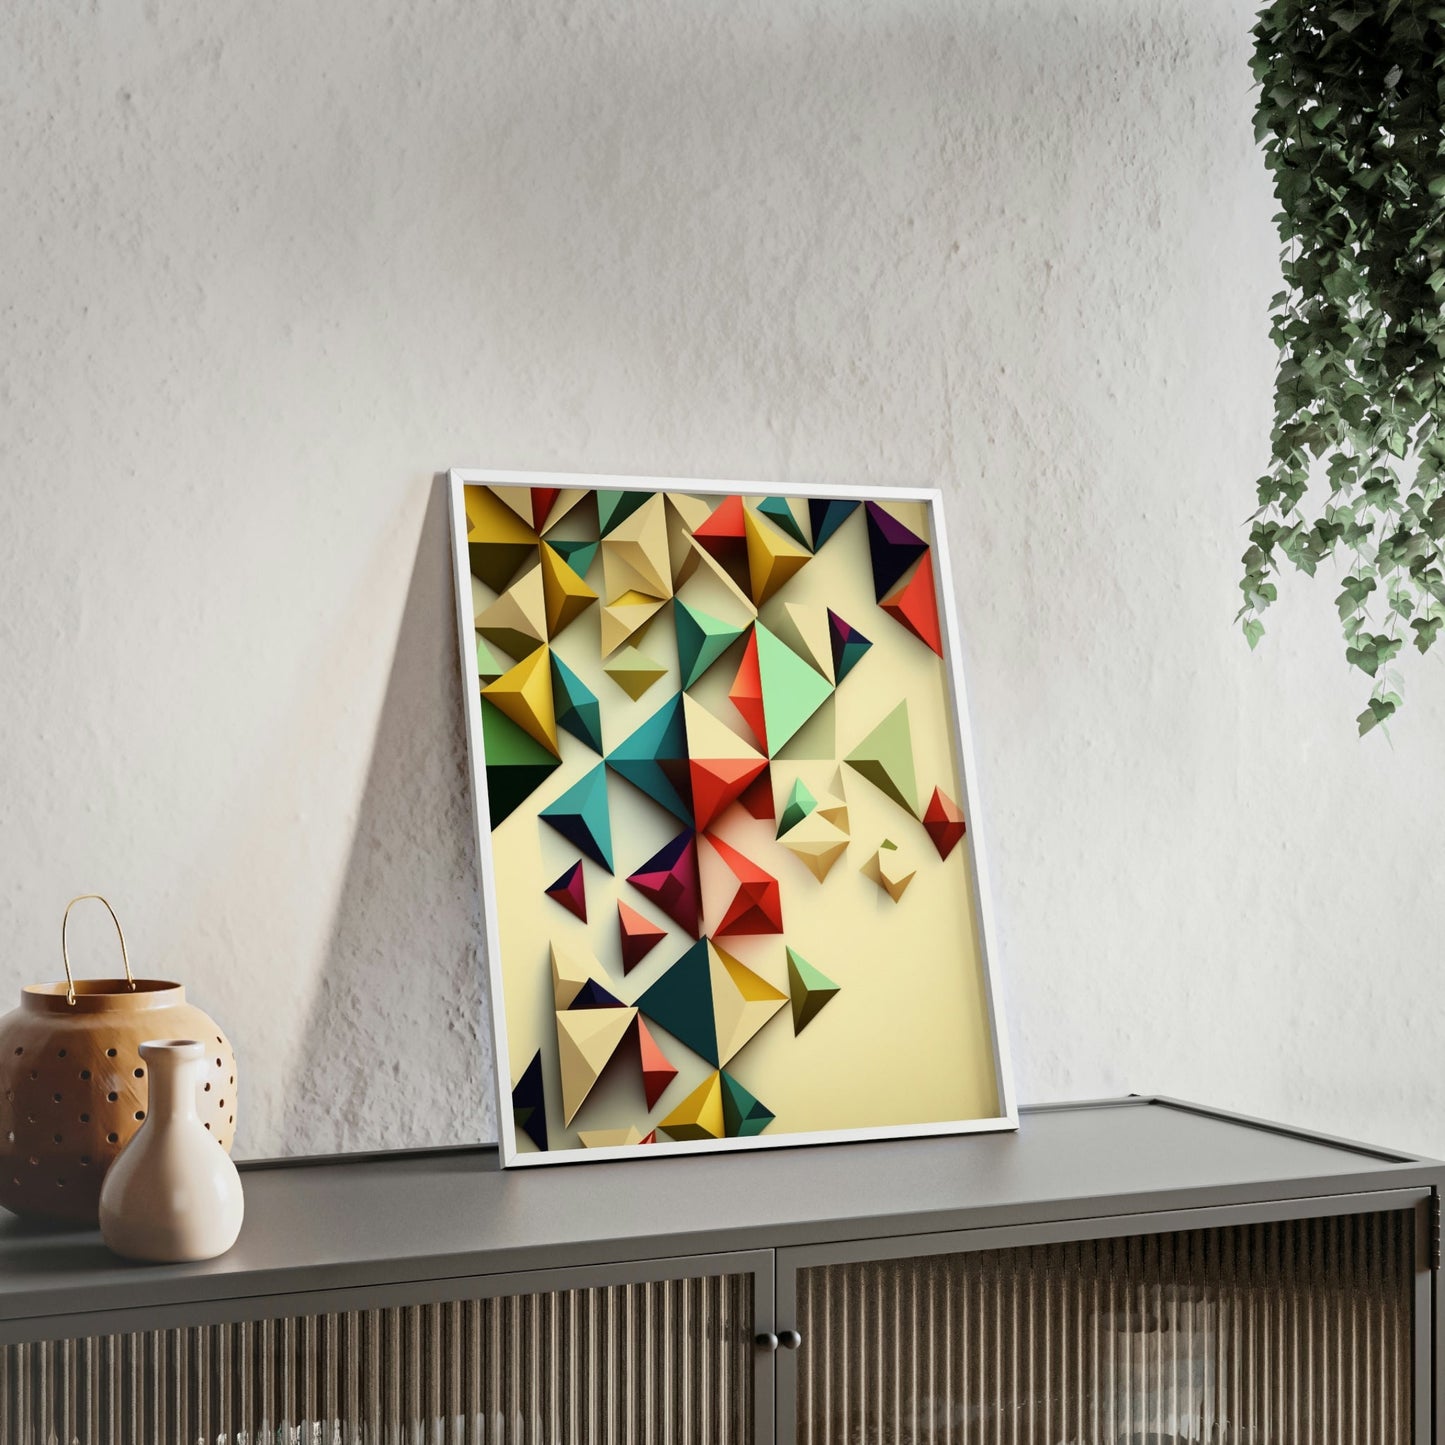 Framed Canvas & Poster Print of Geometric Artwork: A Fusion of Shapes